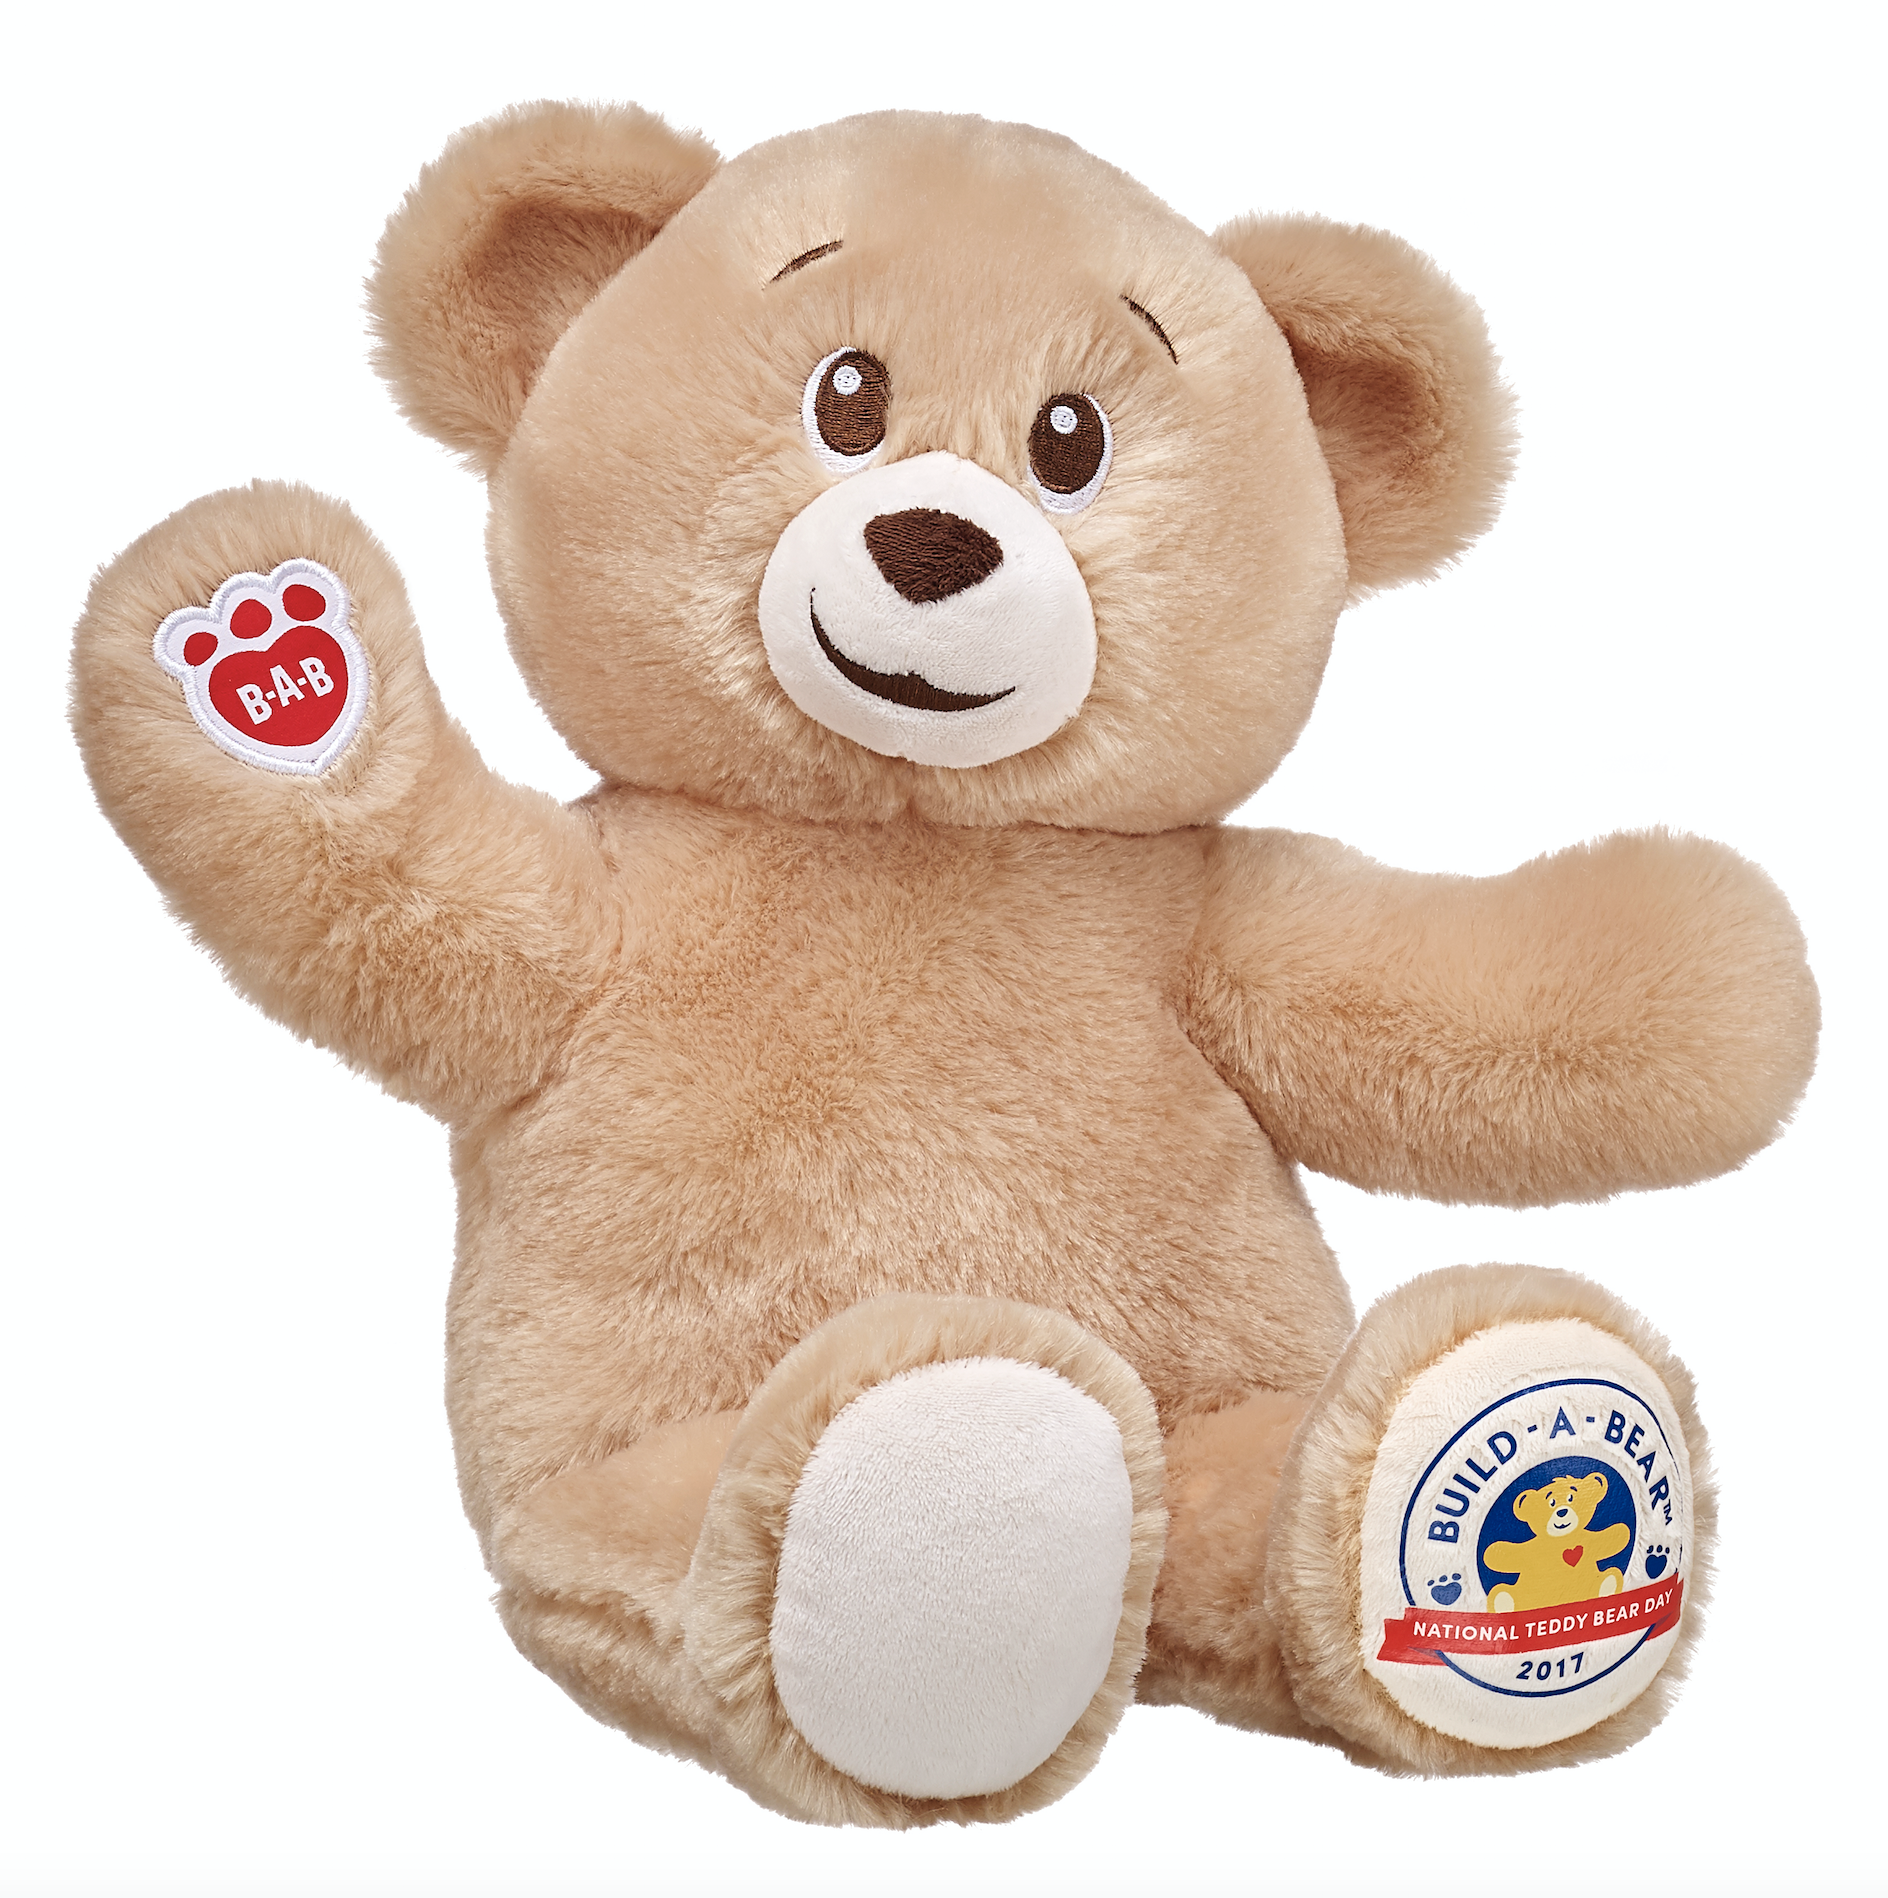 Celebrate National Teddy Bear Day with Build-A-Bear Workshop! 